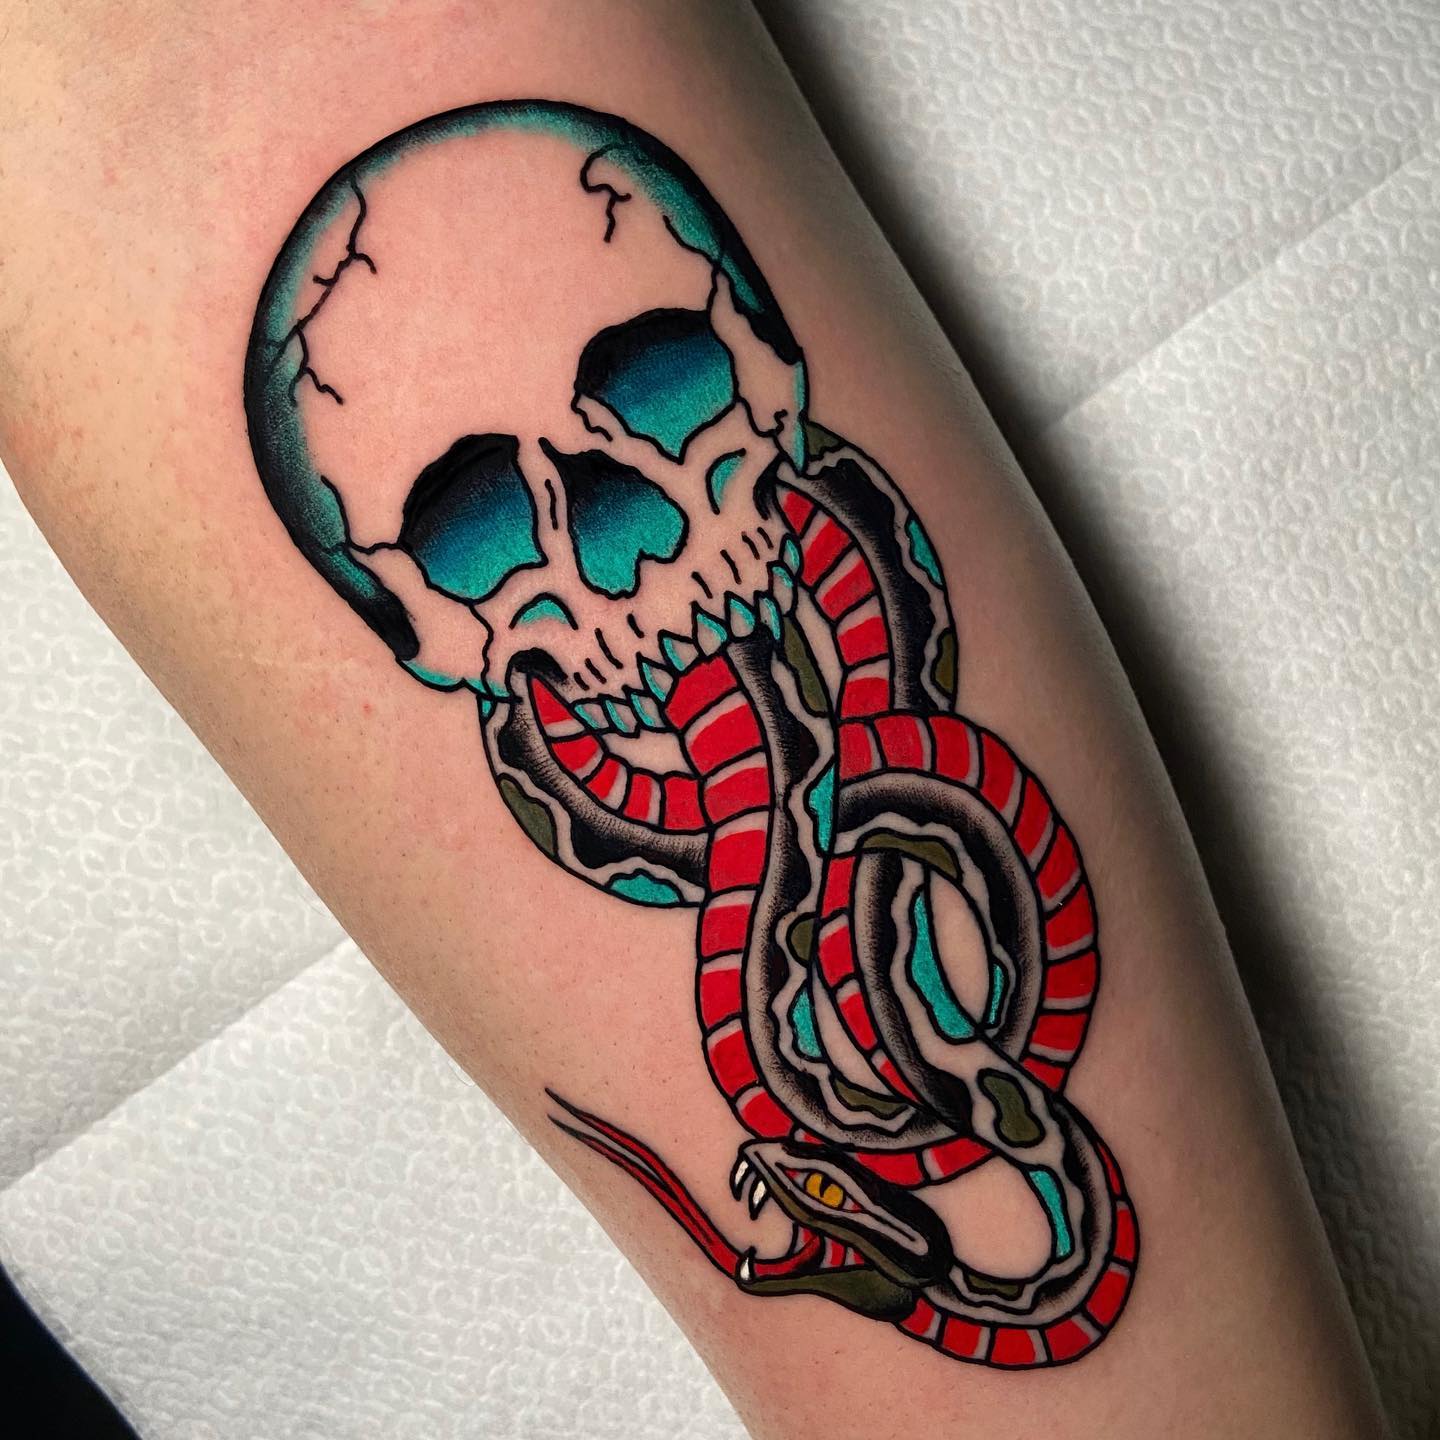 Traditional death eater tattoos are usually black and white, but blue and red colors are used in this example to give it a great look. It is done in a tribal style, but sometimes this type of tattoos can be more fluid or have more of an abstract feel.